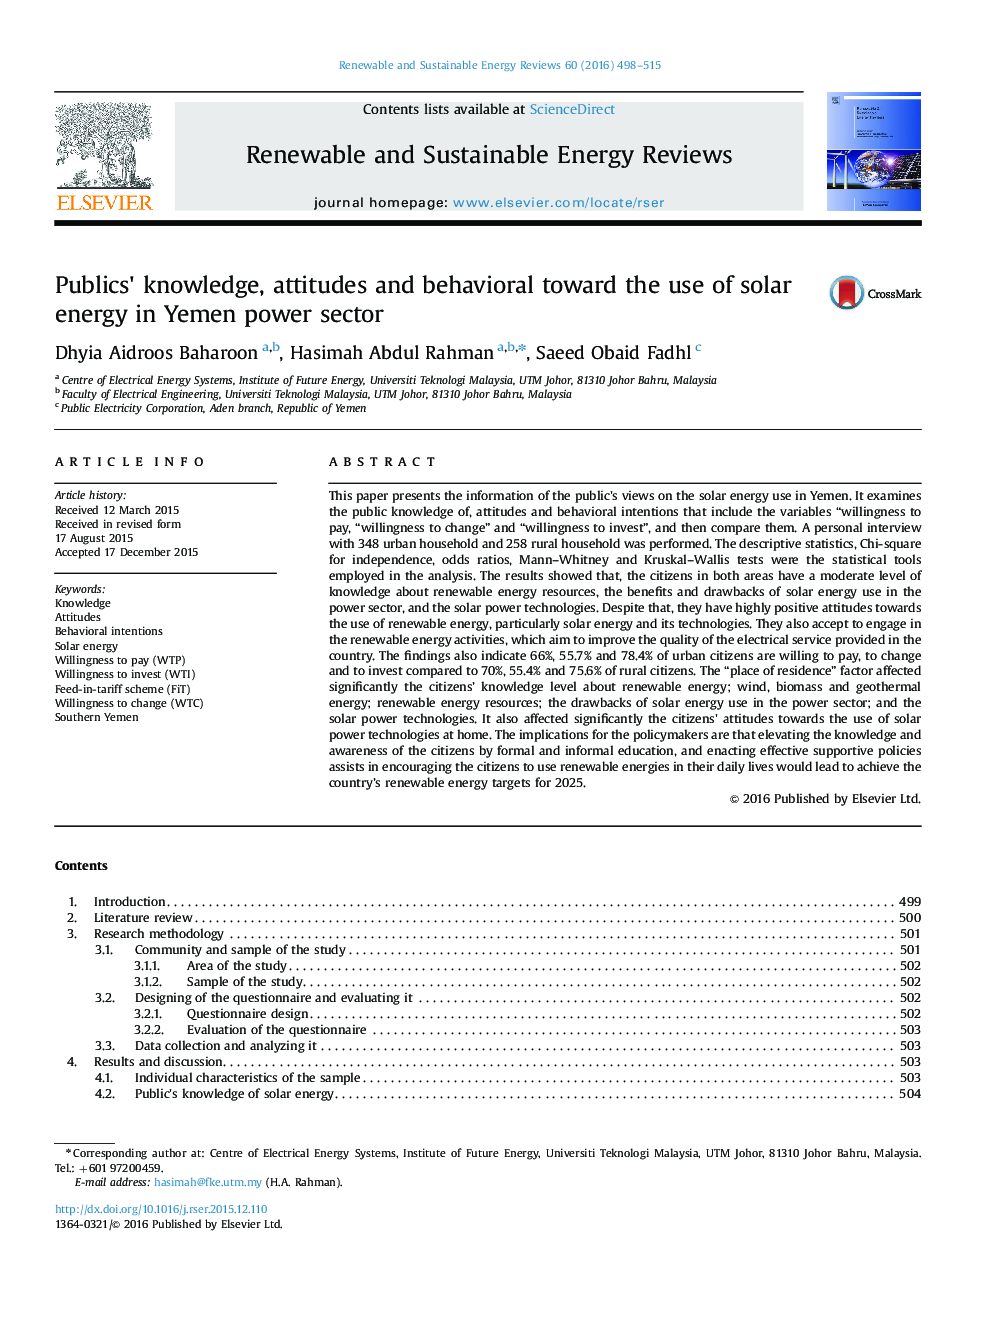 Publics×³ knowledge, attitudes and behavioral toward the use of solar energy in Yemen power sector